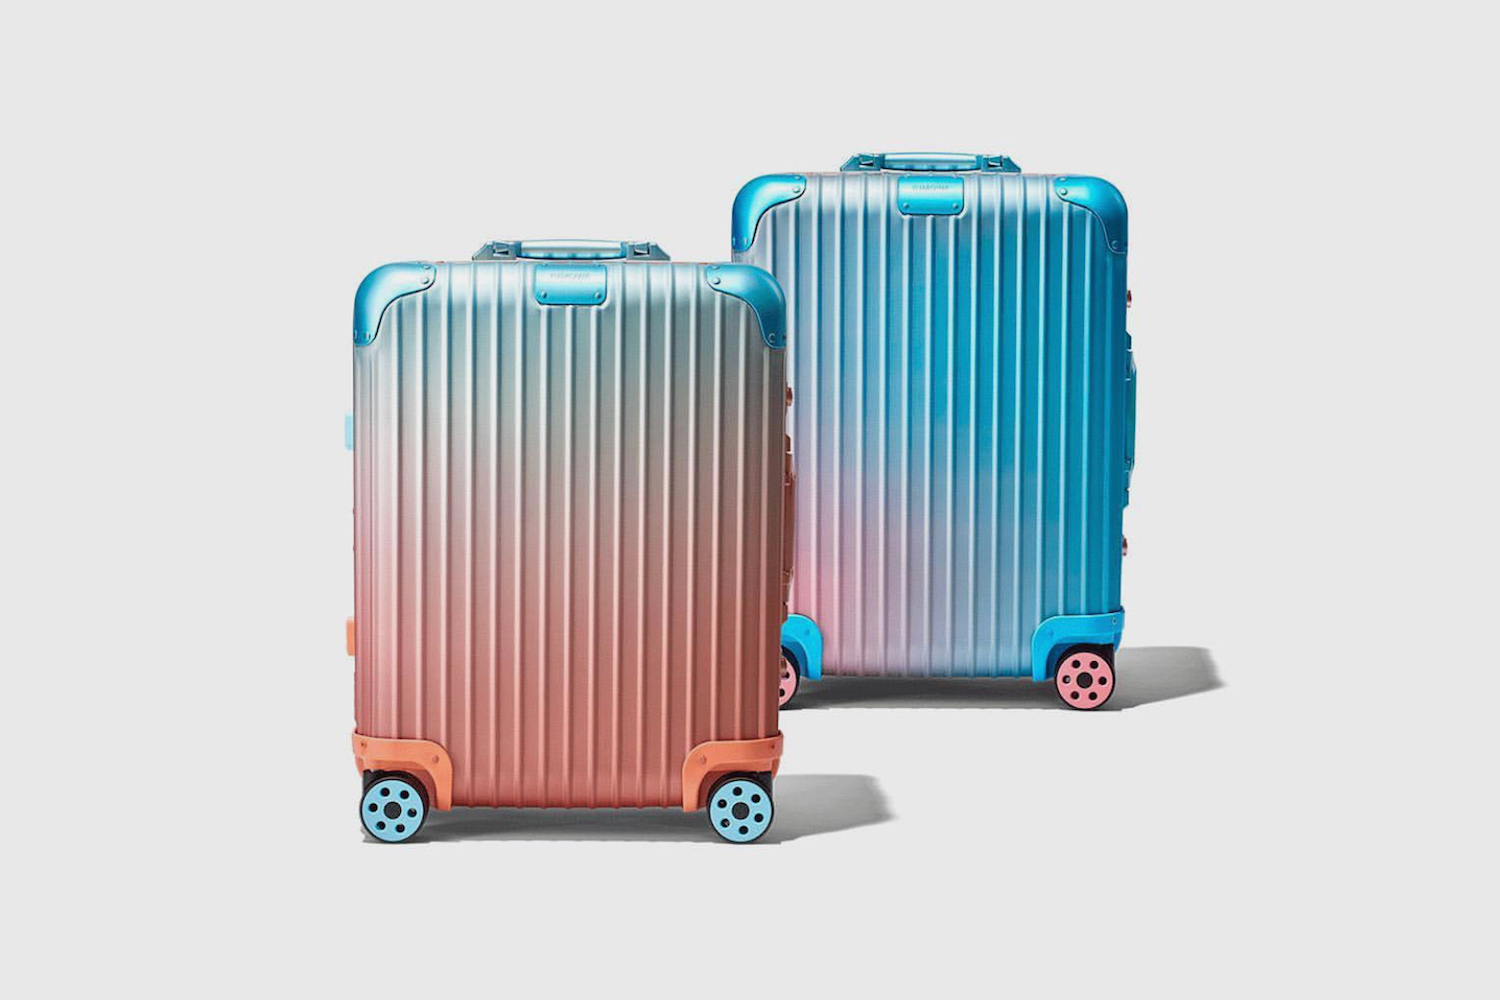 RIMOWA: What to Know About the Luggage Brand, Highsnobiety